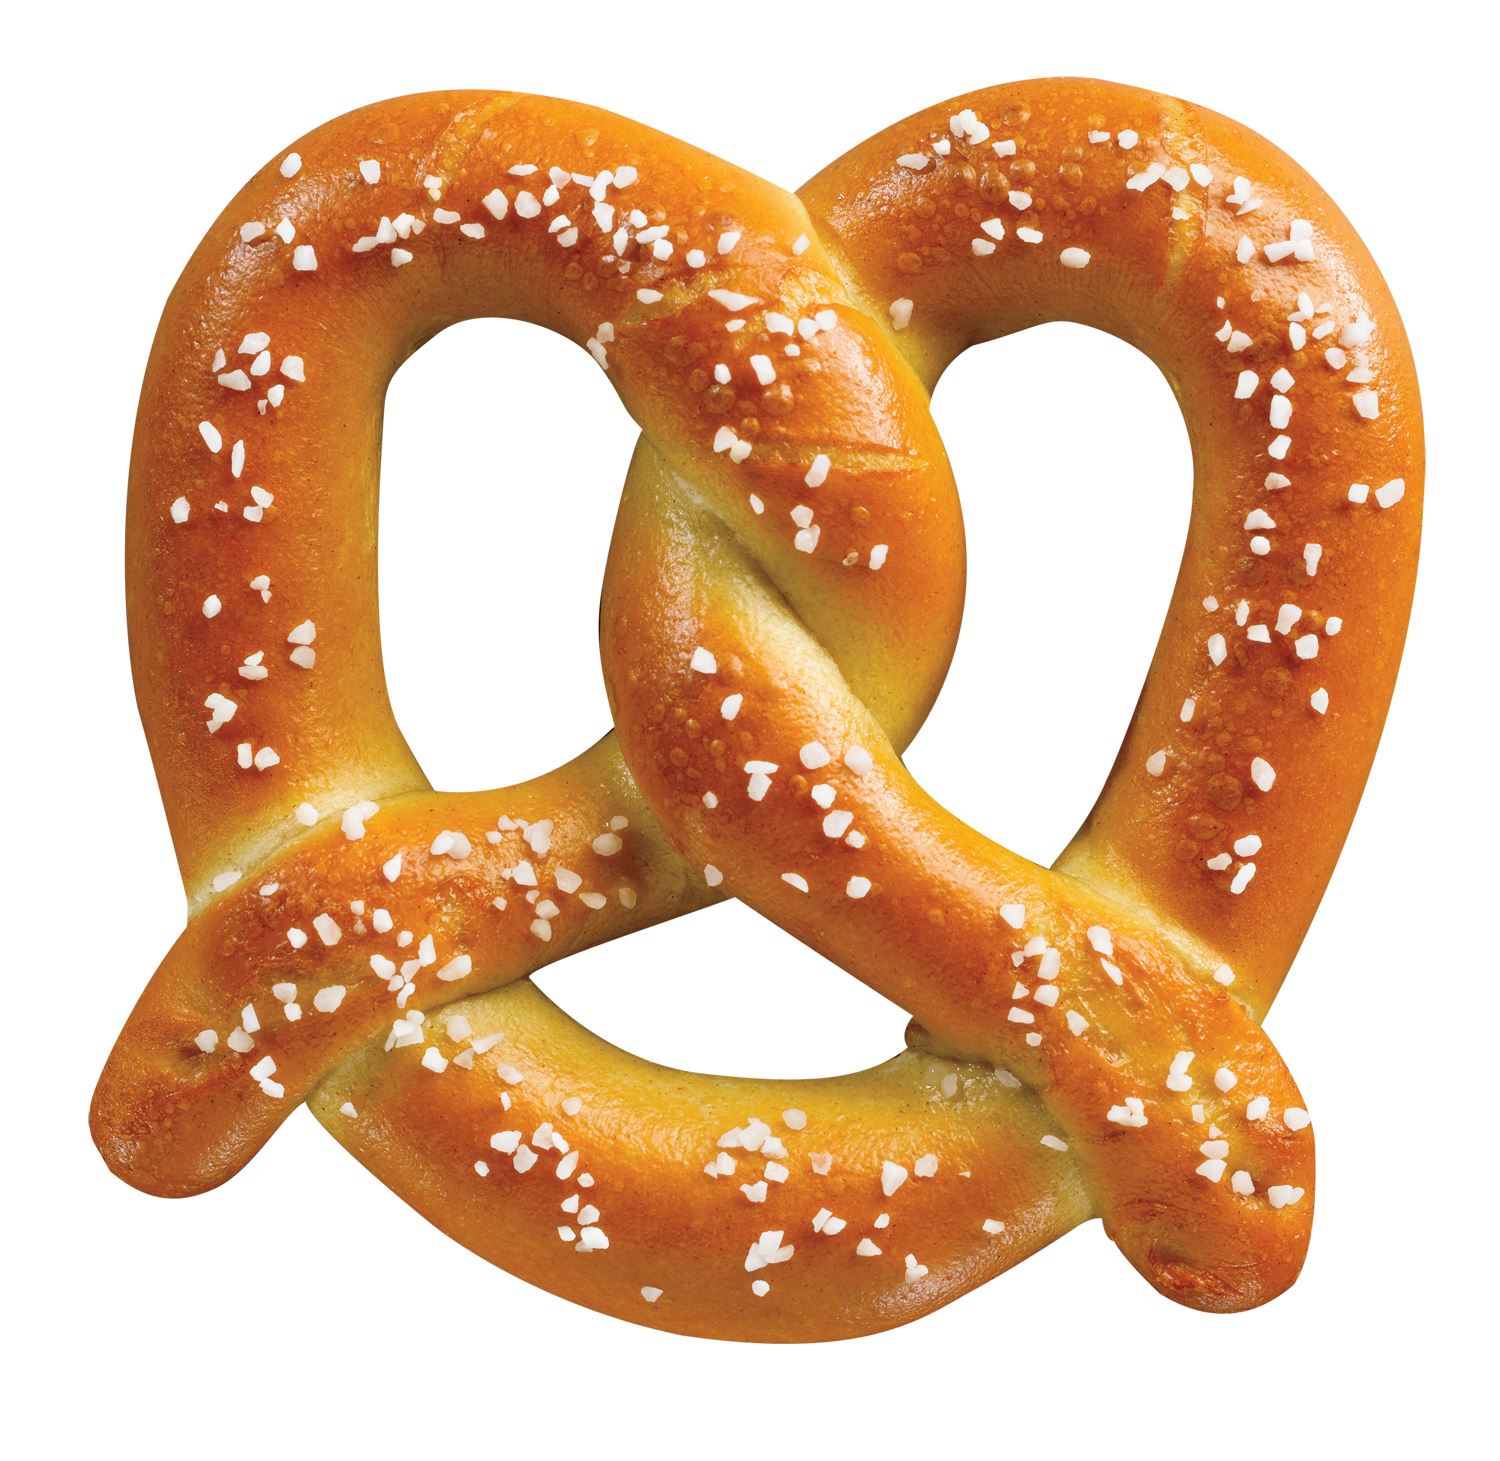 Picture of PRETZELS "NY" - LARGE 50ct